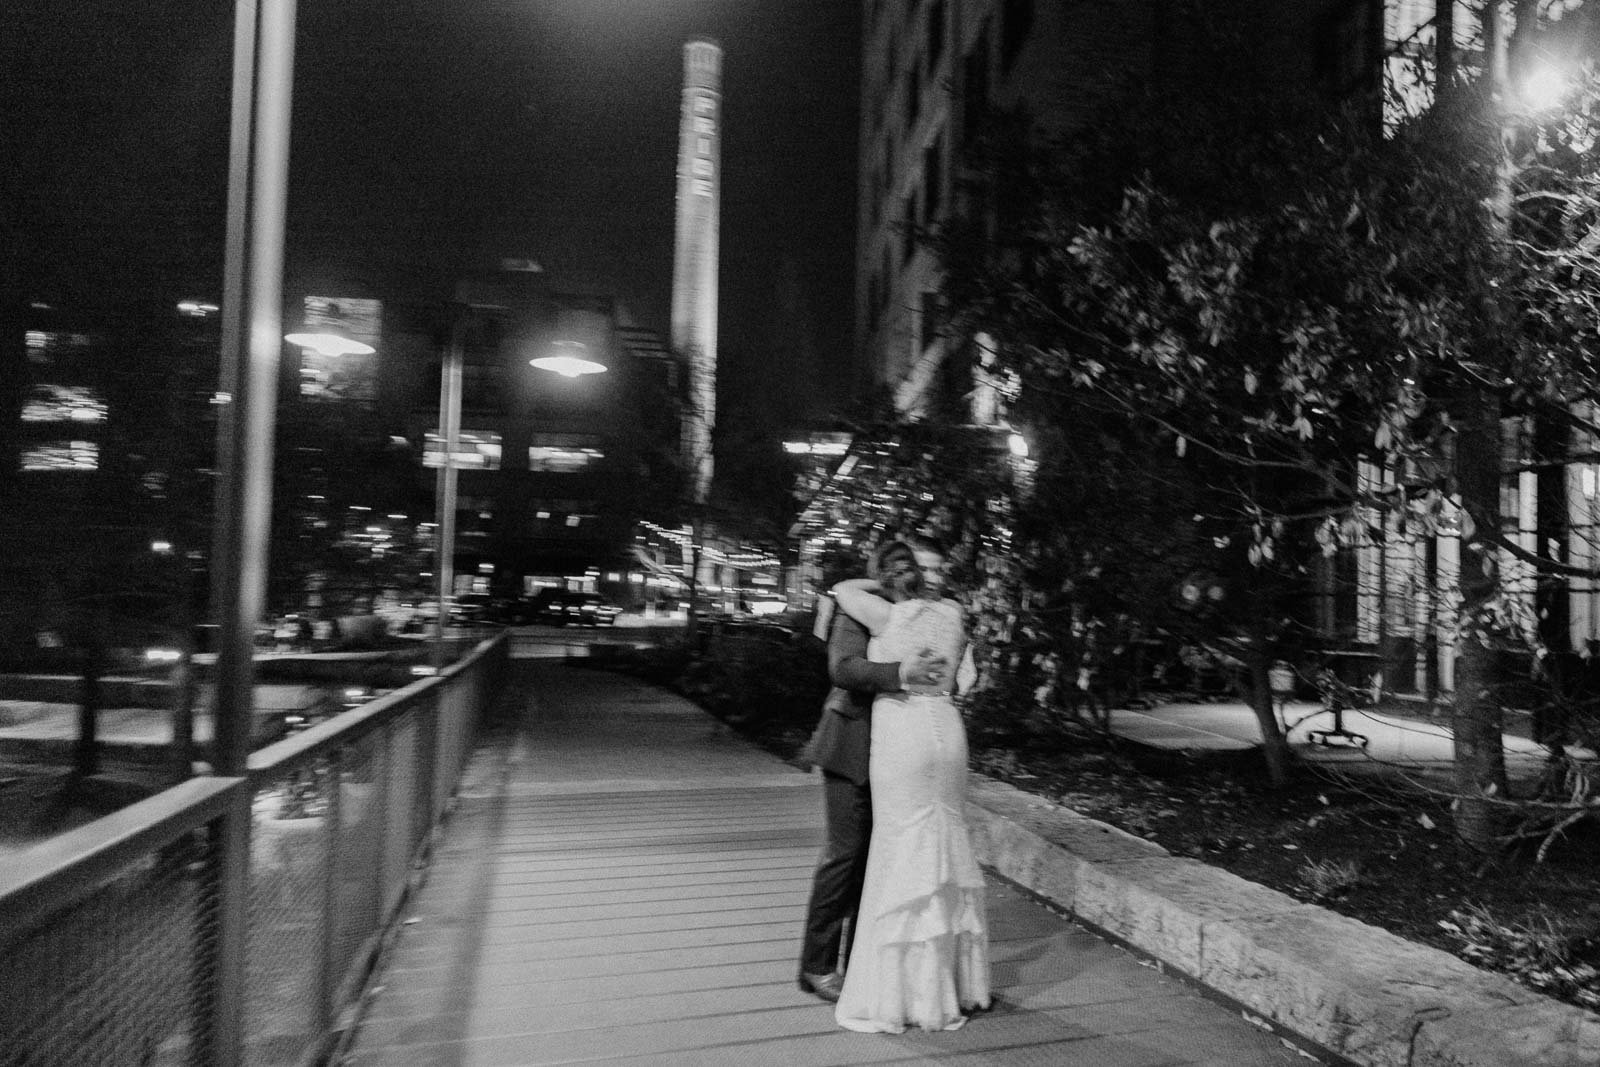 With some intended camera movement the bride and groom have a hug as the night comes to an end at the wedding reception but their lives have just started together